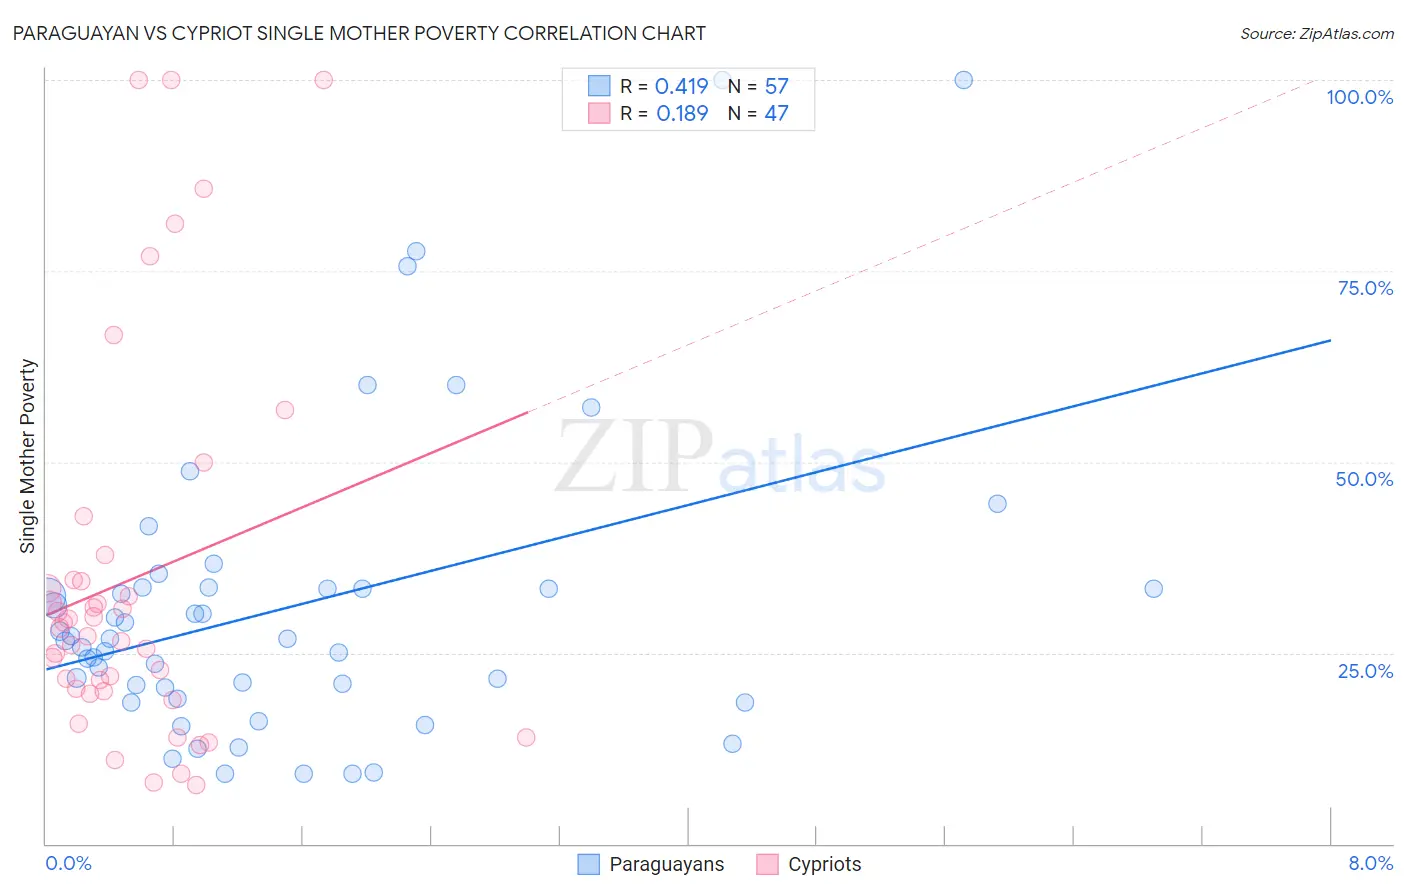 Paraguayan vs Cypriot Single Mother Poverty